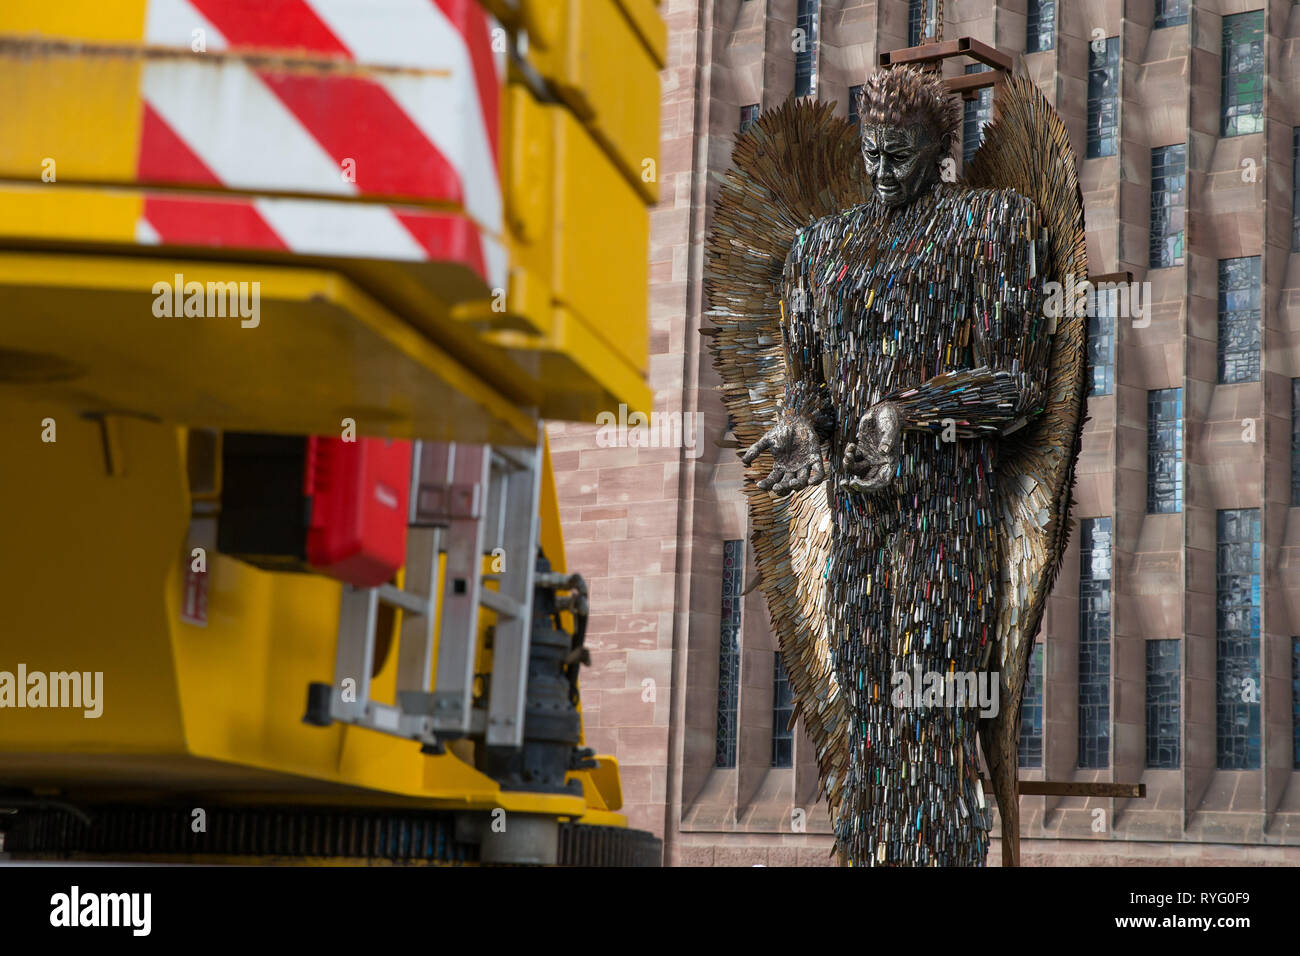 A Knife Angel sculpture, made of 100,000 confiscated knives, is installed at Coventry Cathedral. The 27-foot high artwork, created by artist Alfie Bradley, starts its residence at the cathedral until April 23 'as a physical reminder of the effects of violence and aggression'. Coventry Cathedral, Priory Street, Coventry. Stock Photo